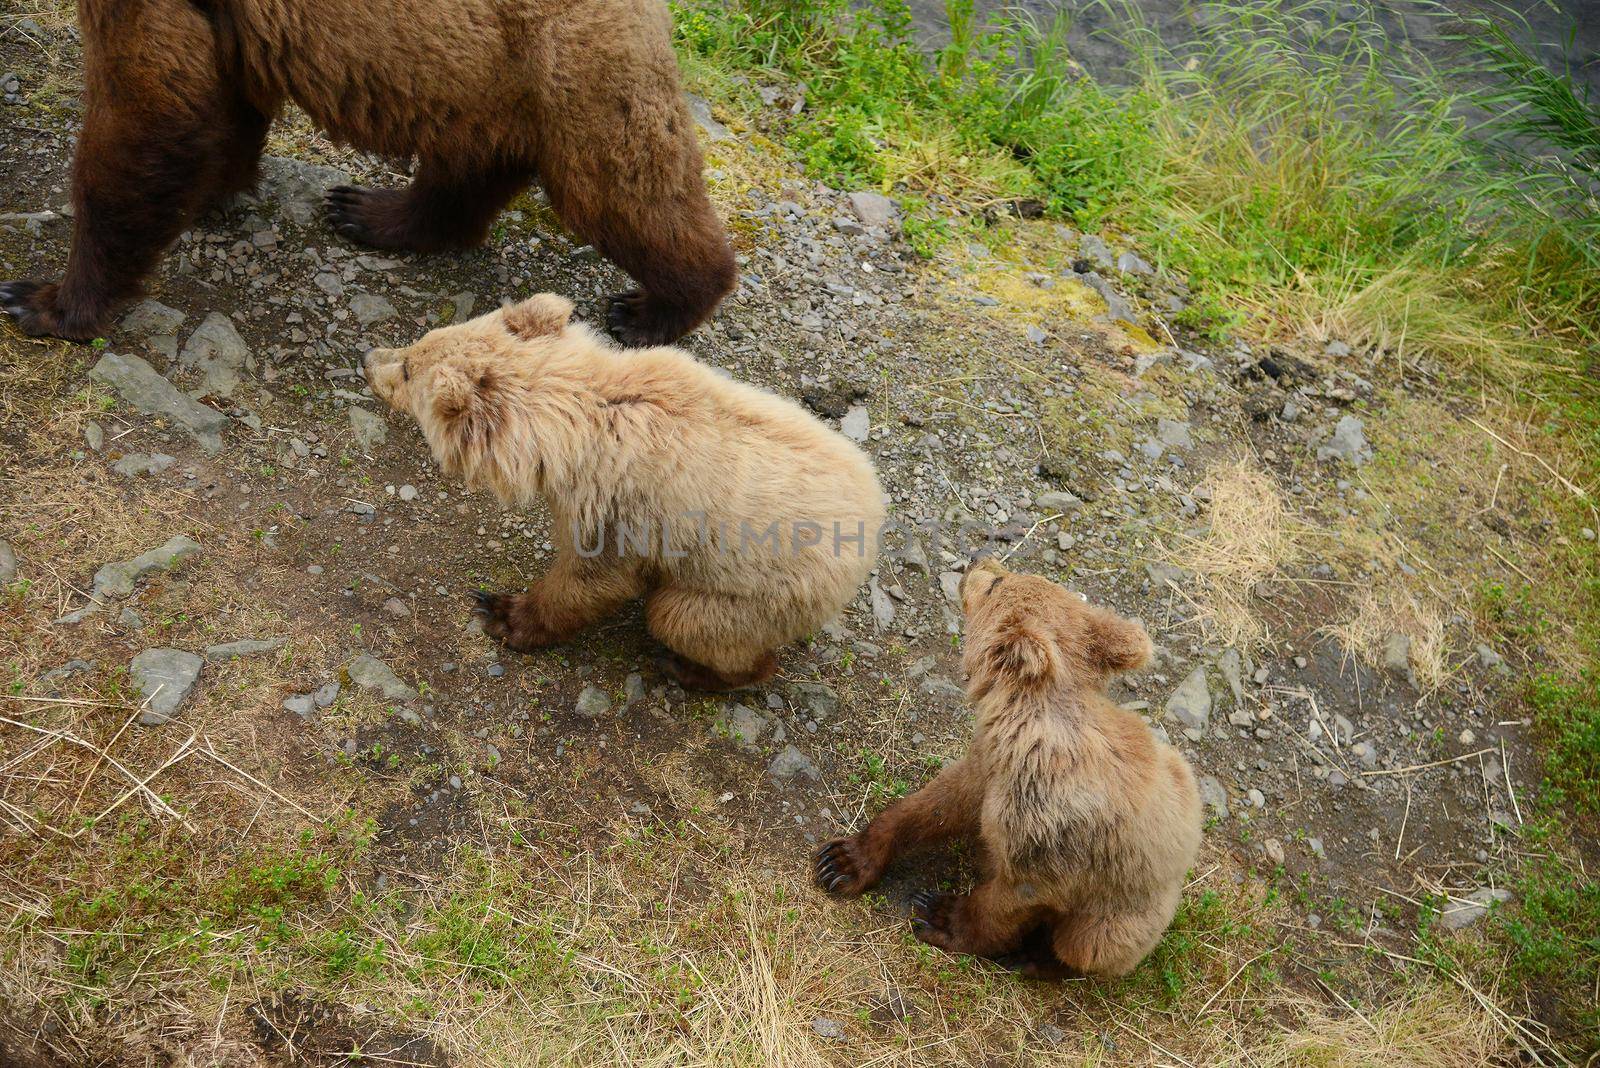 bear cubs and mother on a grass area on brooks river shore in katmai national park